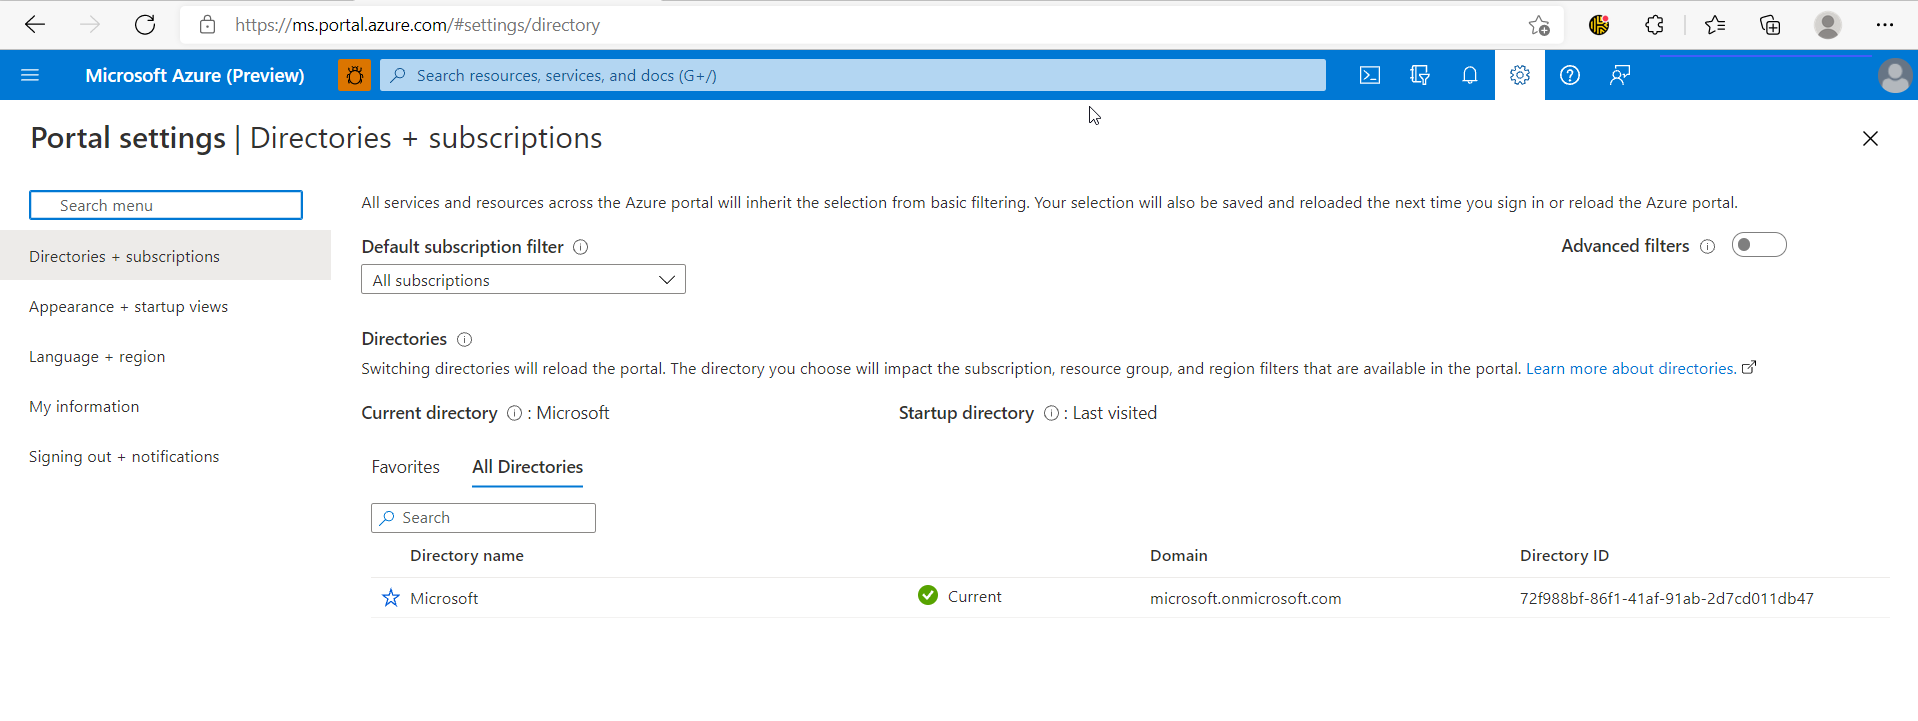 A screenshot of the Directory and Subscription window in Azure portal.